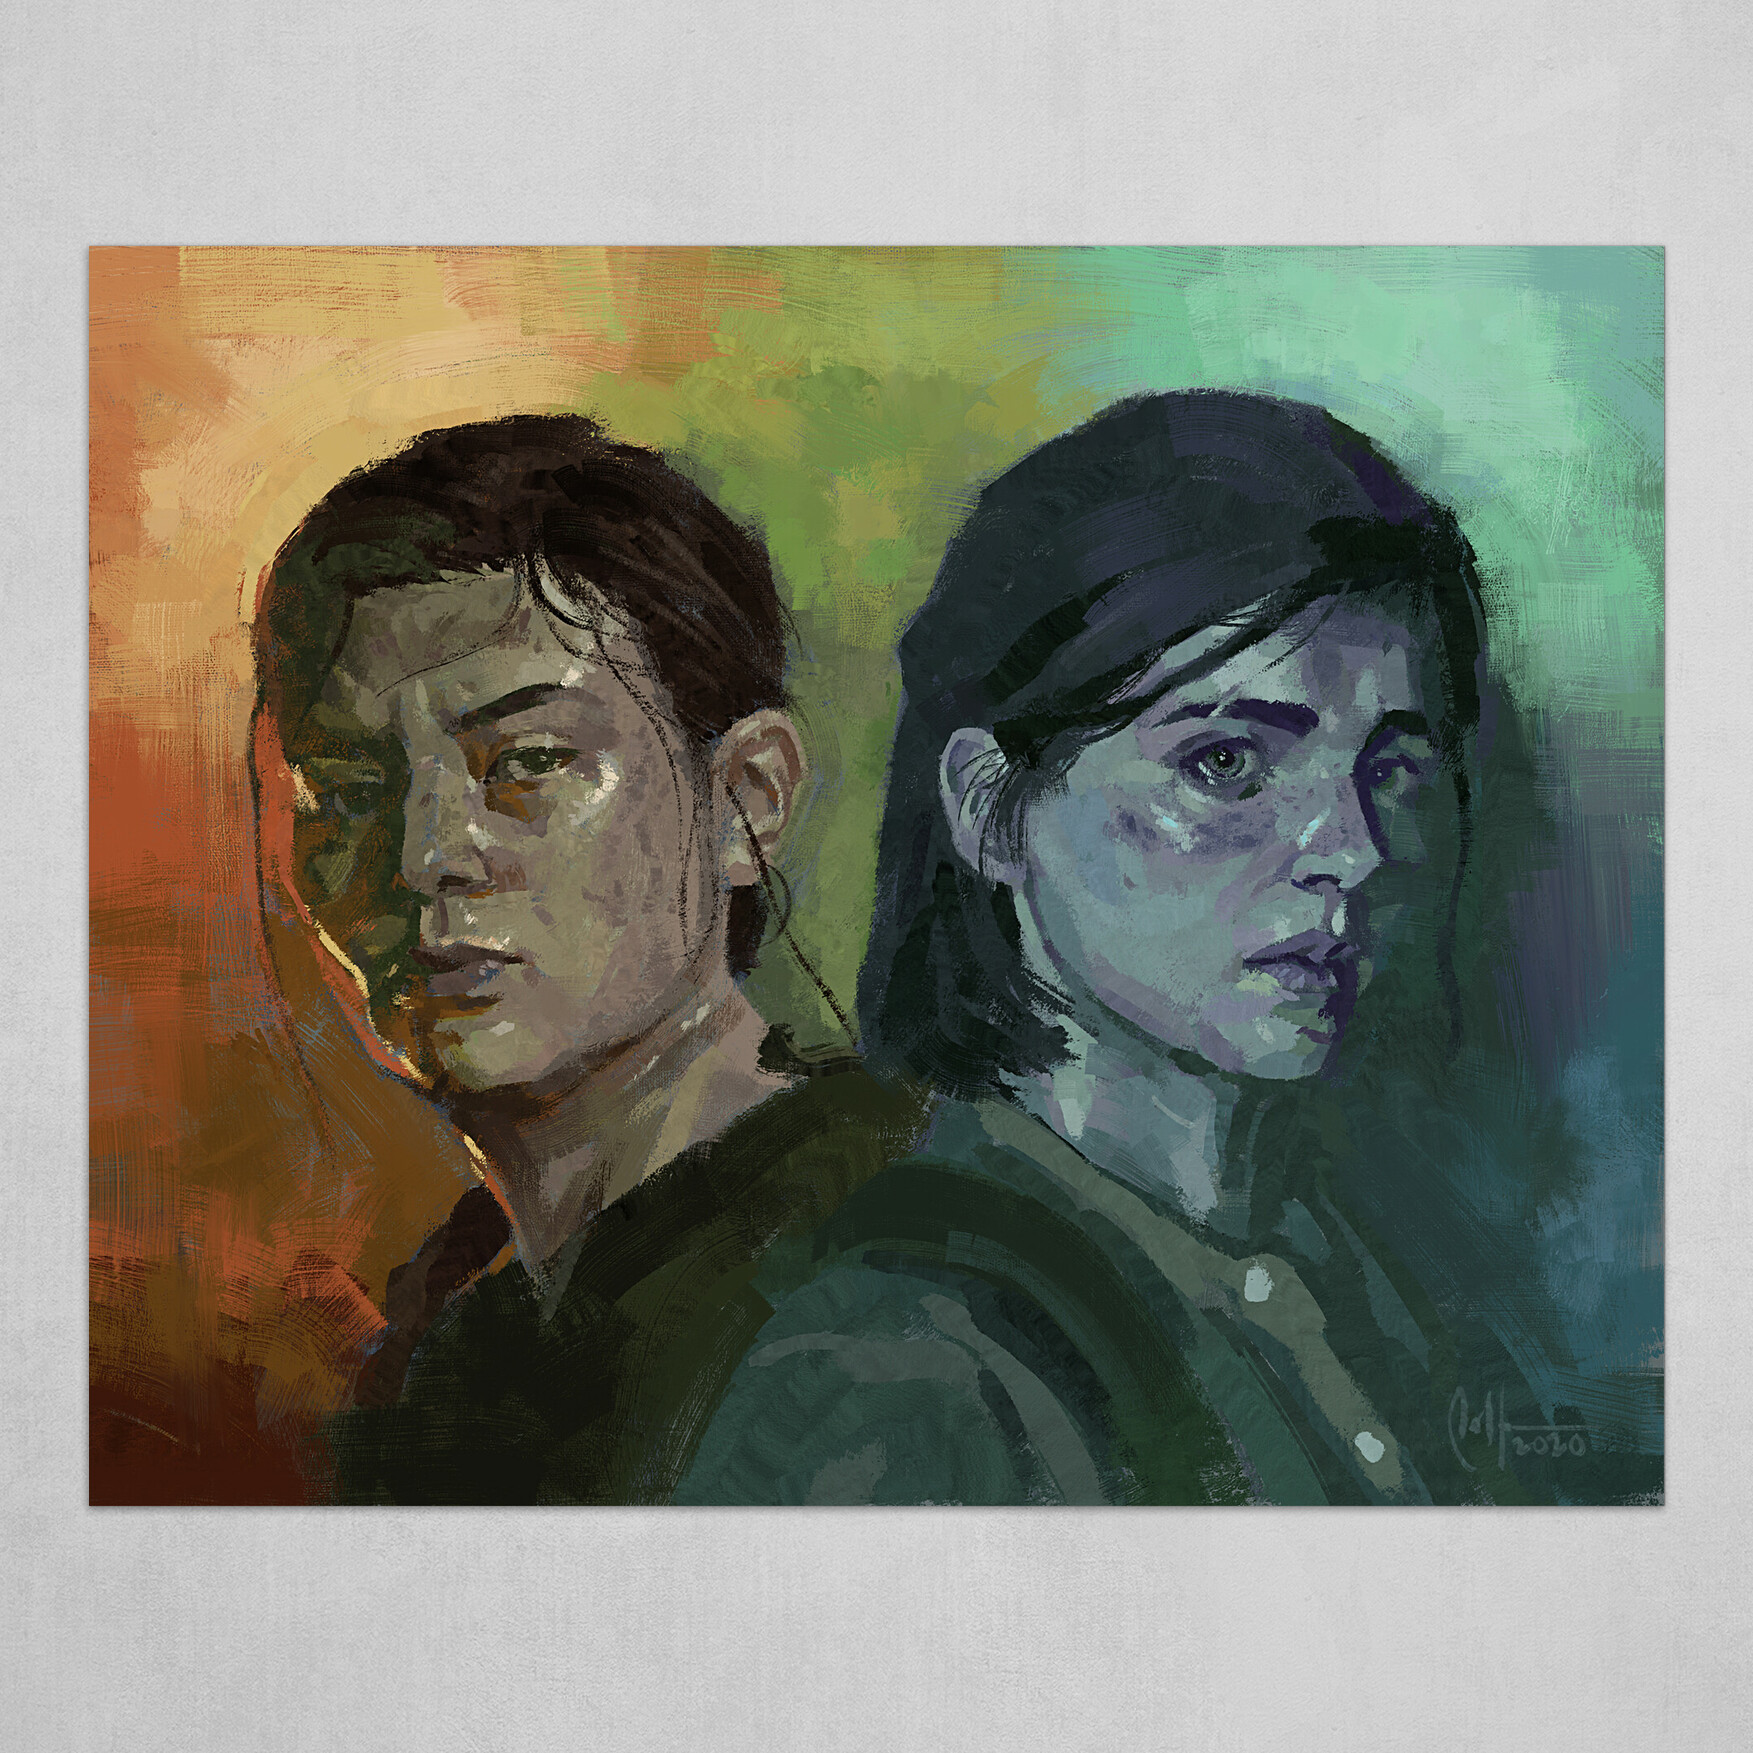 The Last of us Part II 2 Ellie Abby Portrait Poster Giclee Print